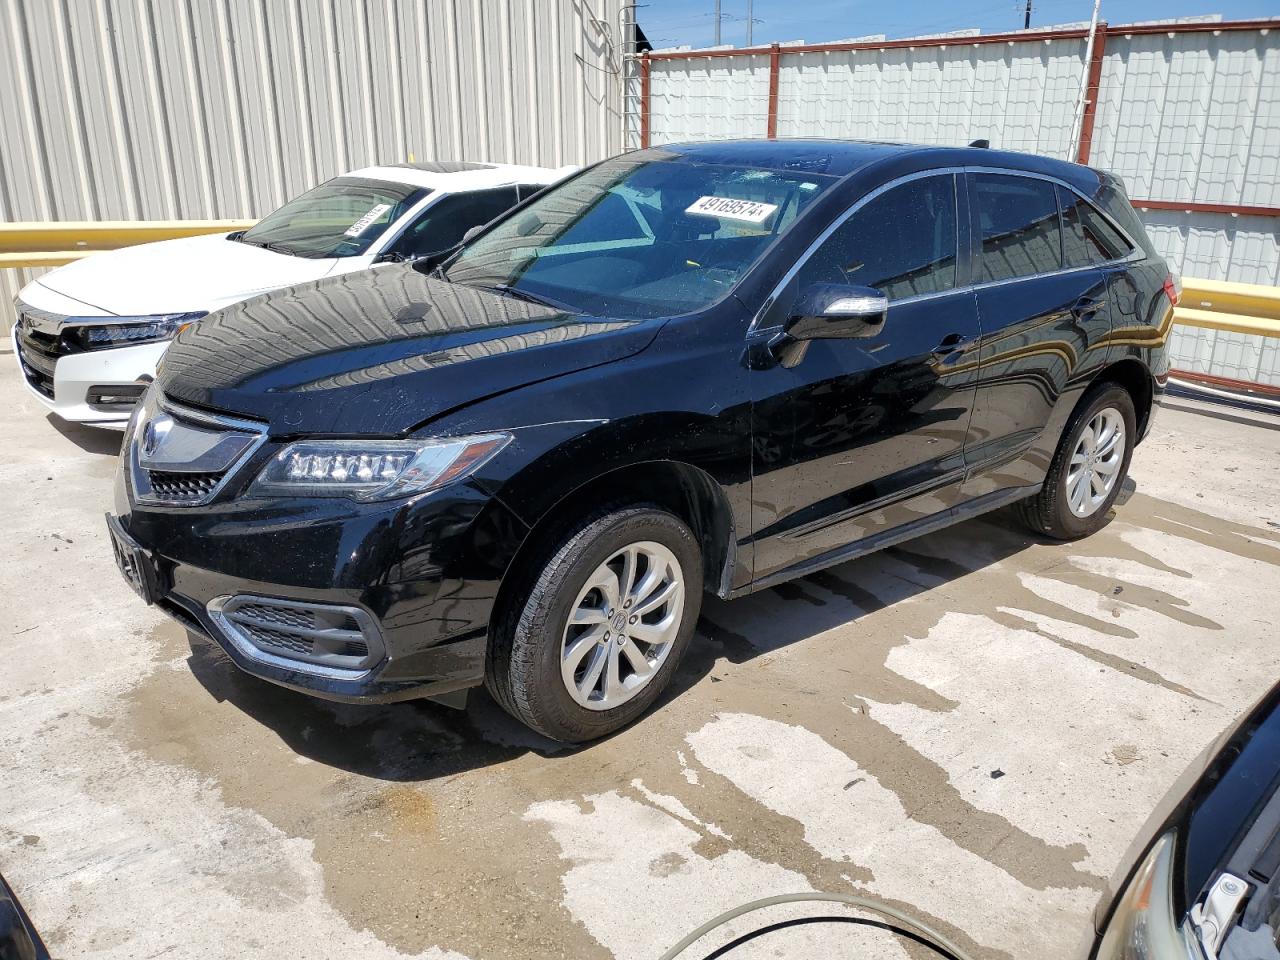 vin: 5J8TB3H58GL013632 5J8TB3H58GL013632 2016 acura rdx 3500 for Sale in 76052 3840, Tx - Ft. Worth, Haslet, Texas, USA